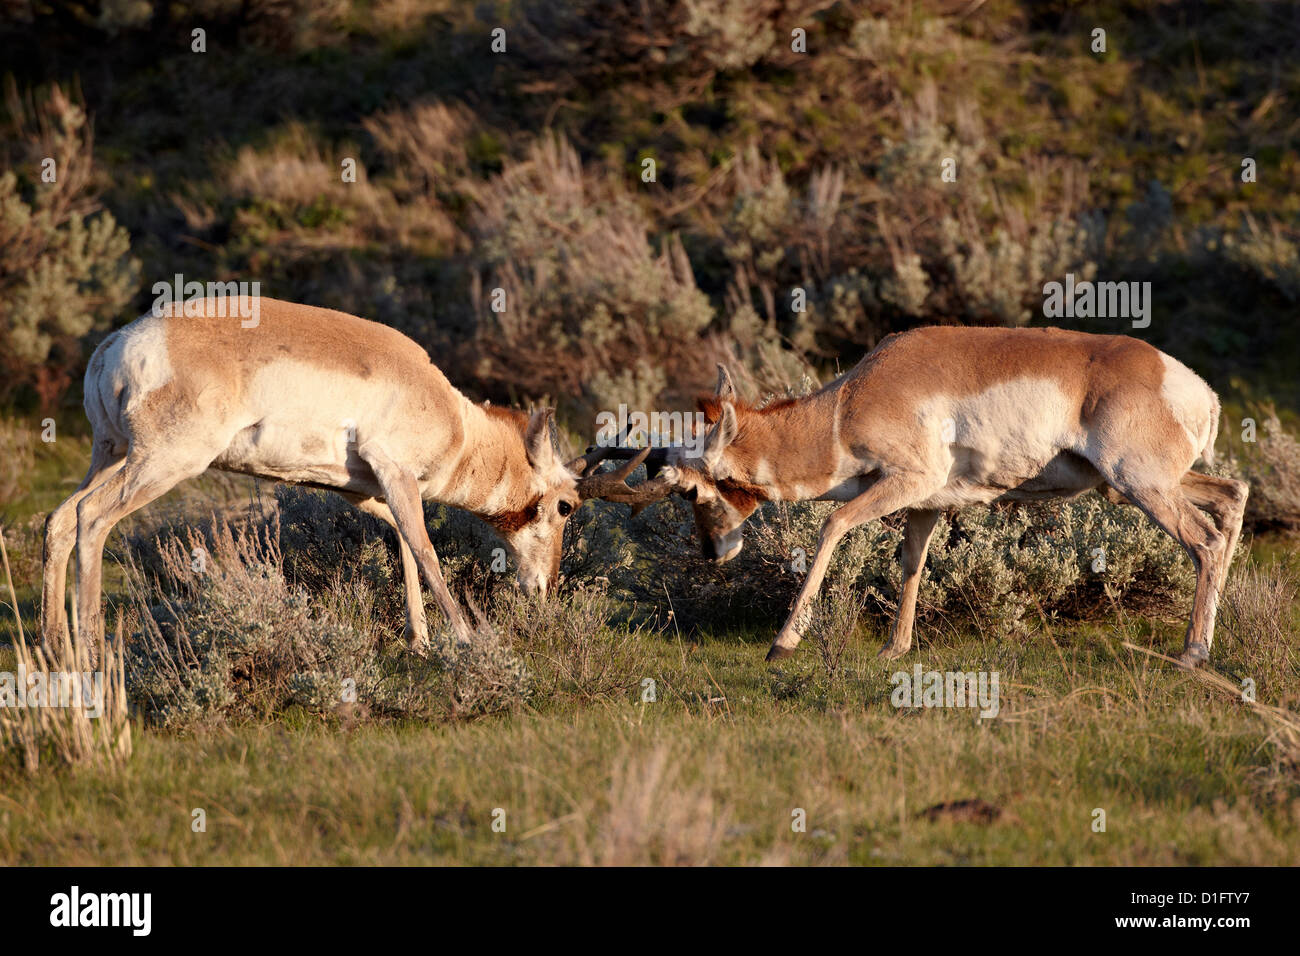 Deux Pronghorn (Antilocapra americana) sparring bucks, Parc National de Yellowstone, Wyoming, United States of America Banque D'Images